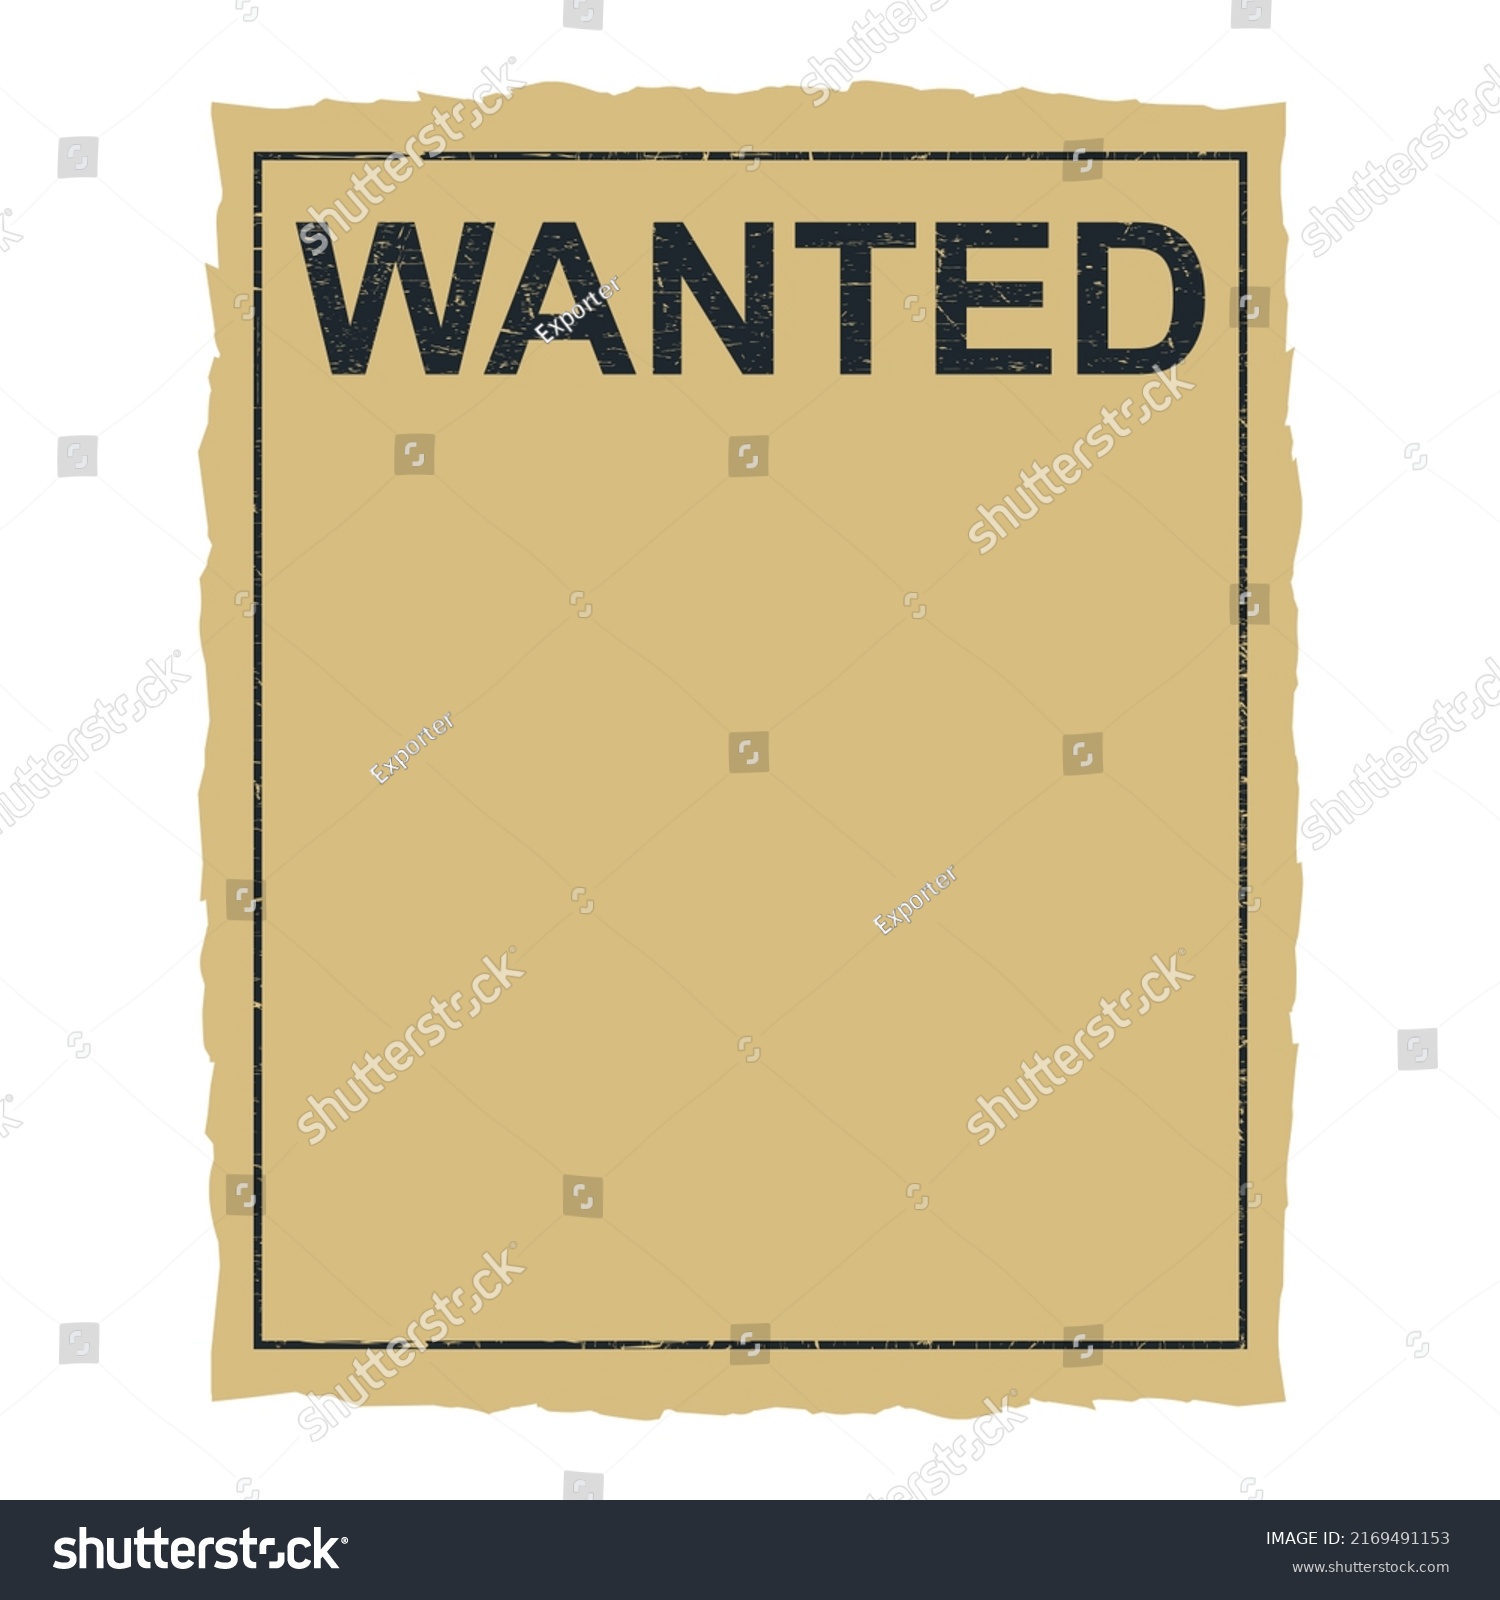 Wanted Poster Template Old Wanted Paper Stock Vector (Royalty Free ...